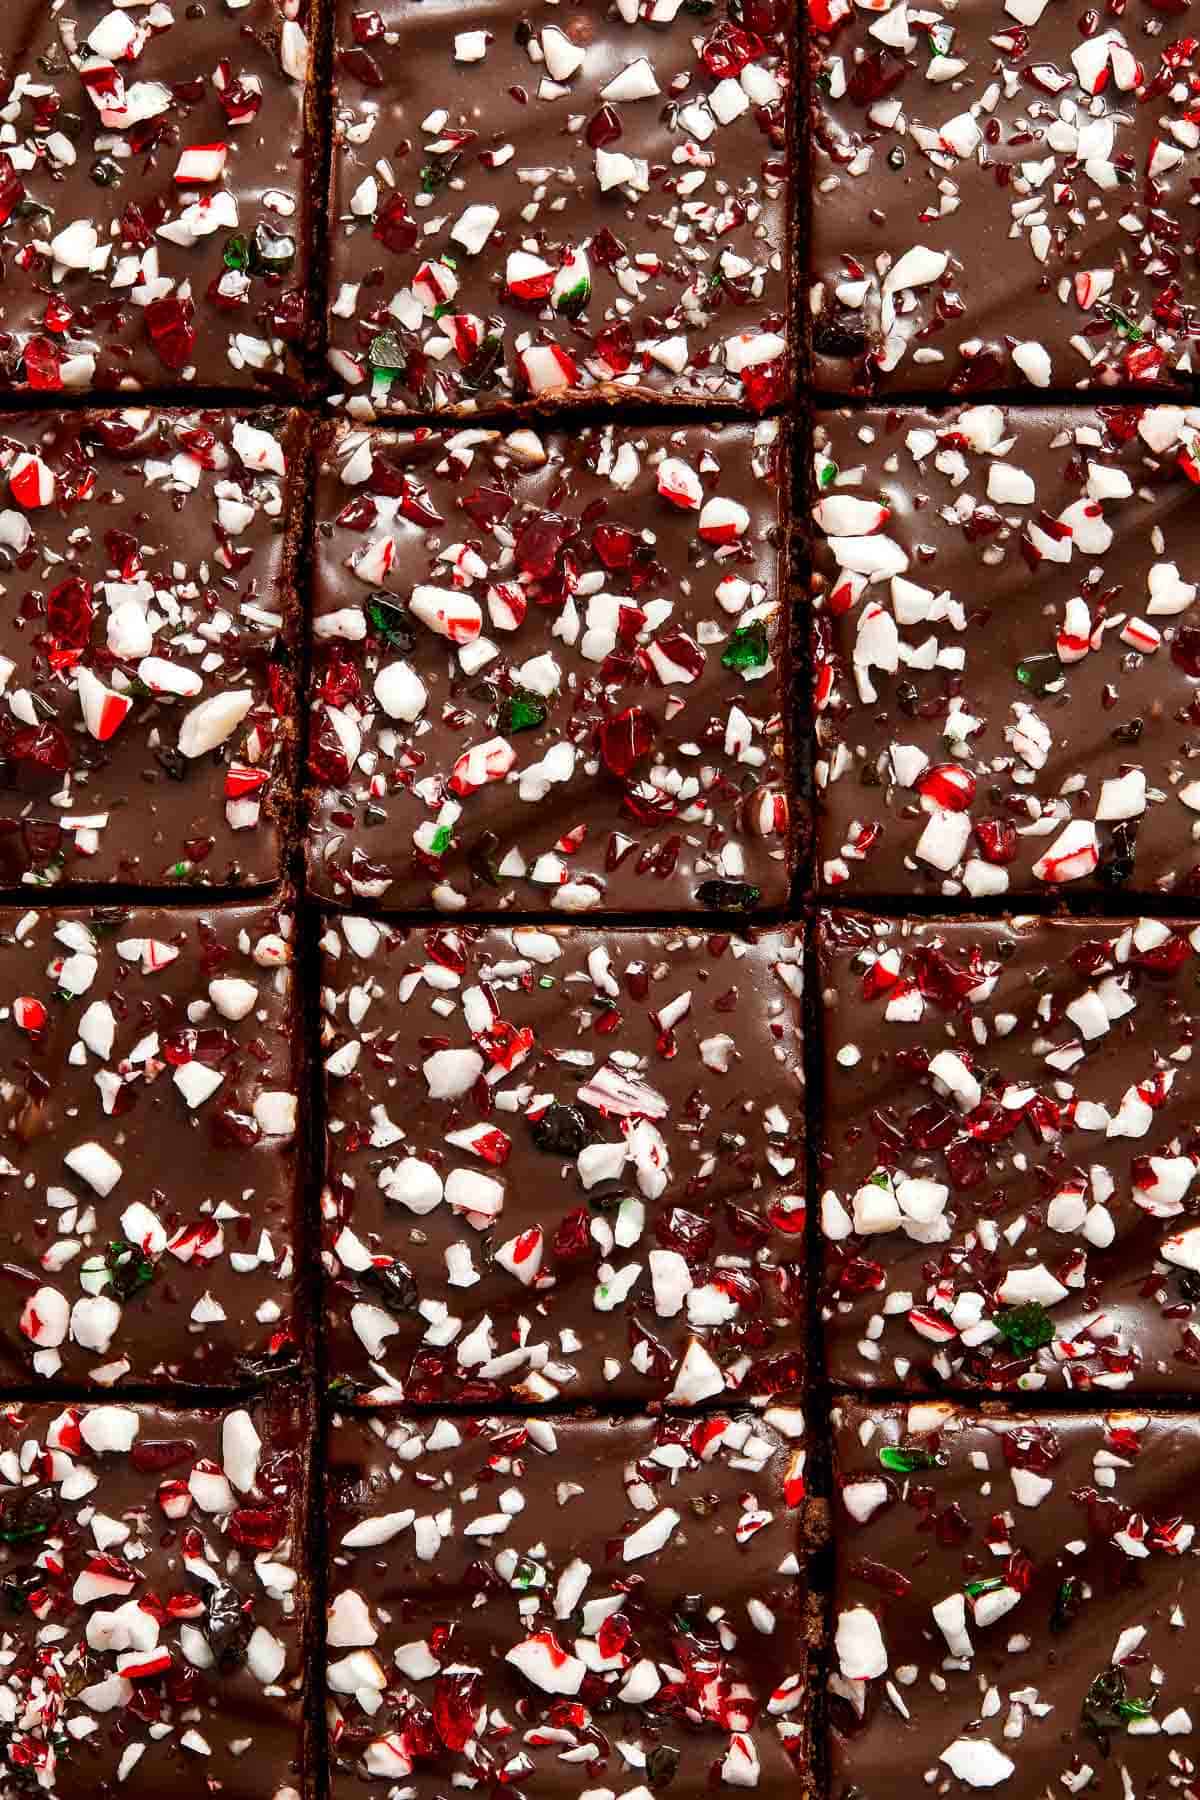 Peppermint Brownies are rich and decadent with a fudgy brownie base, a delicious minty chocolate ganache layer, and crushed candy canes sprinkled on top. | aheadofthyme.com